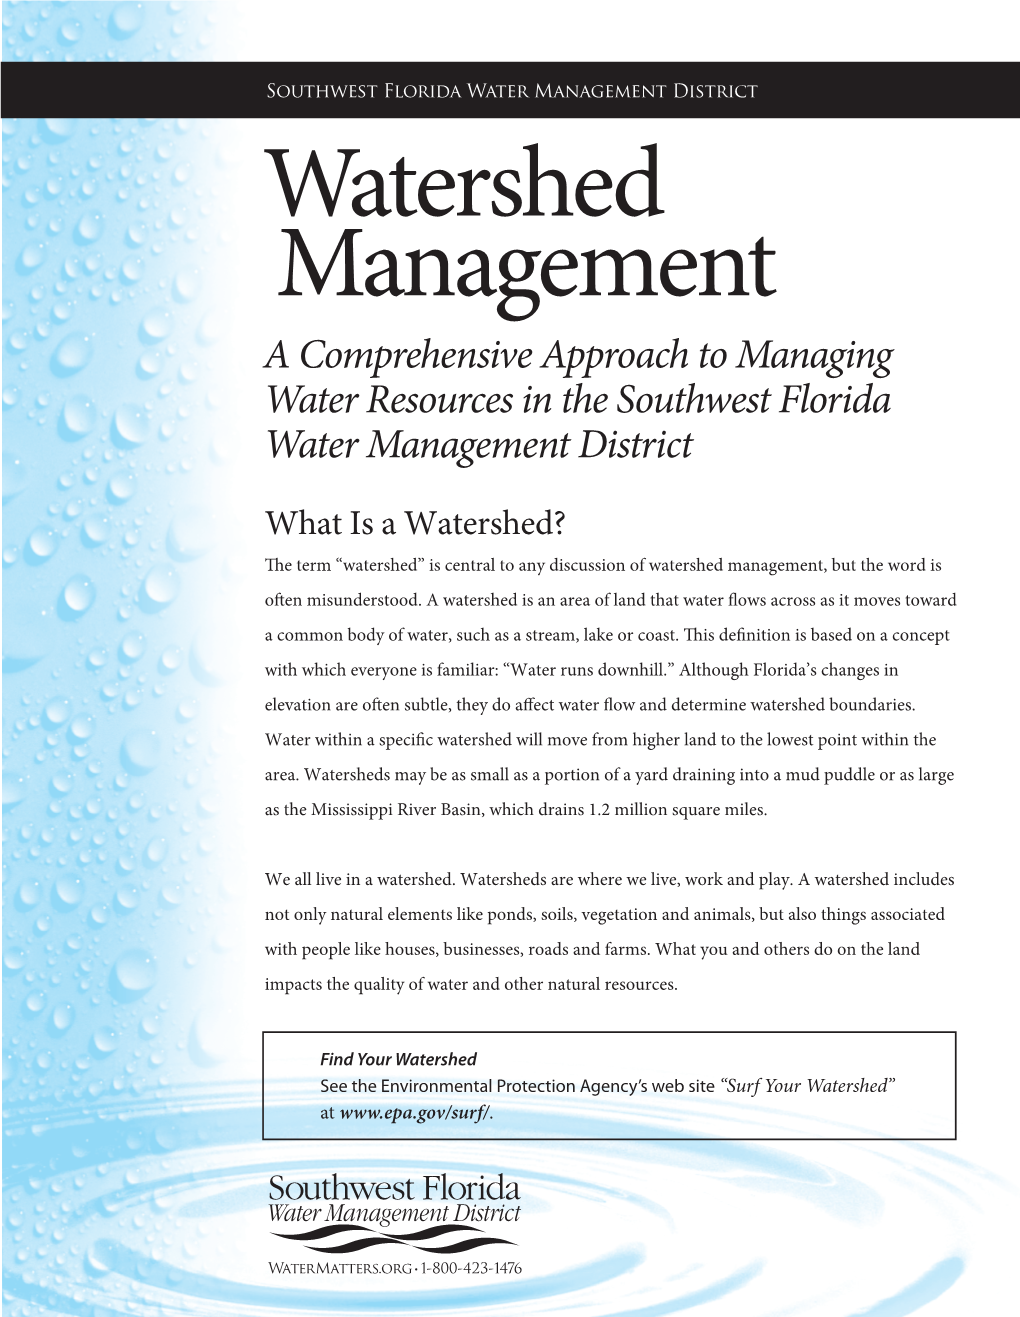 Watershed Management a Comprehensive Approach to Managing Water Resources in the Southwest Florida Water Managment District